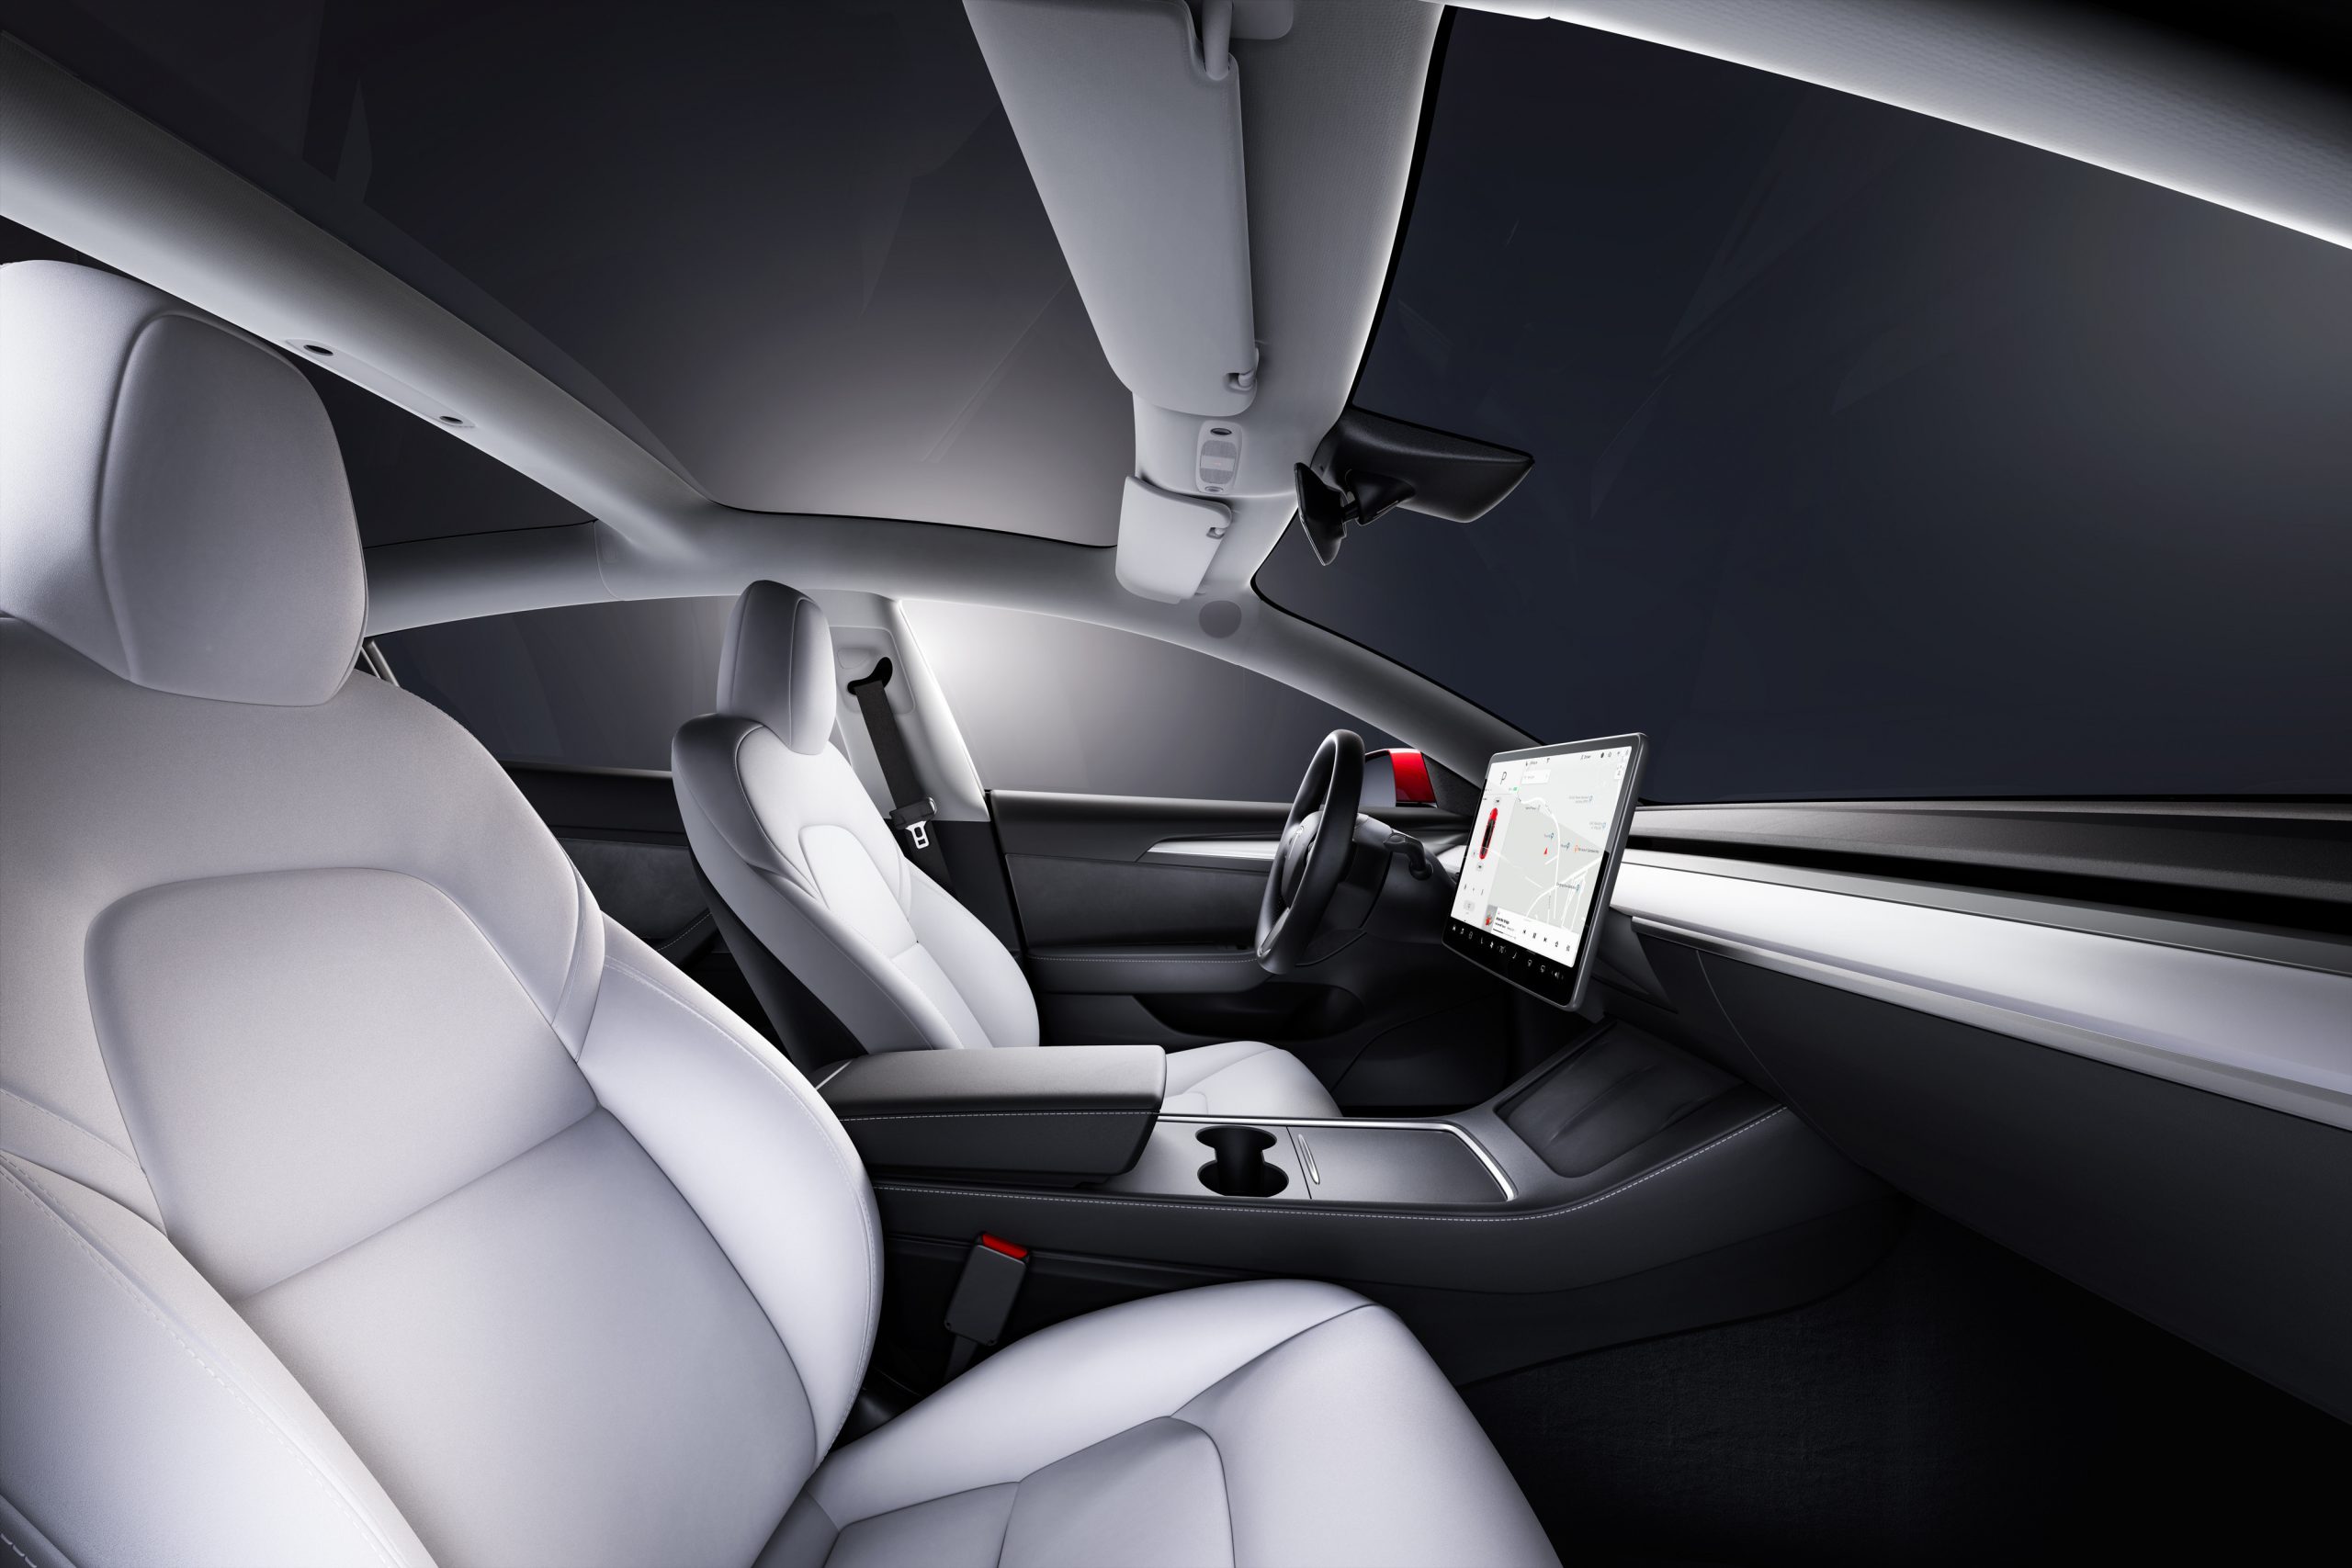 The white interior of a Tesla model 3 shot from the passenger seat